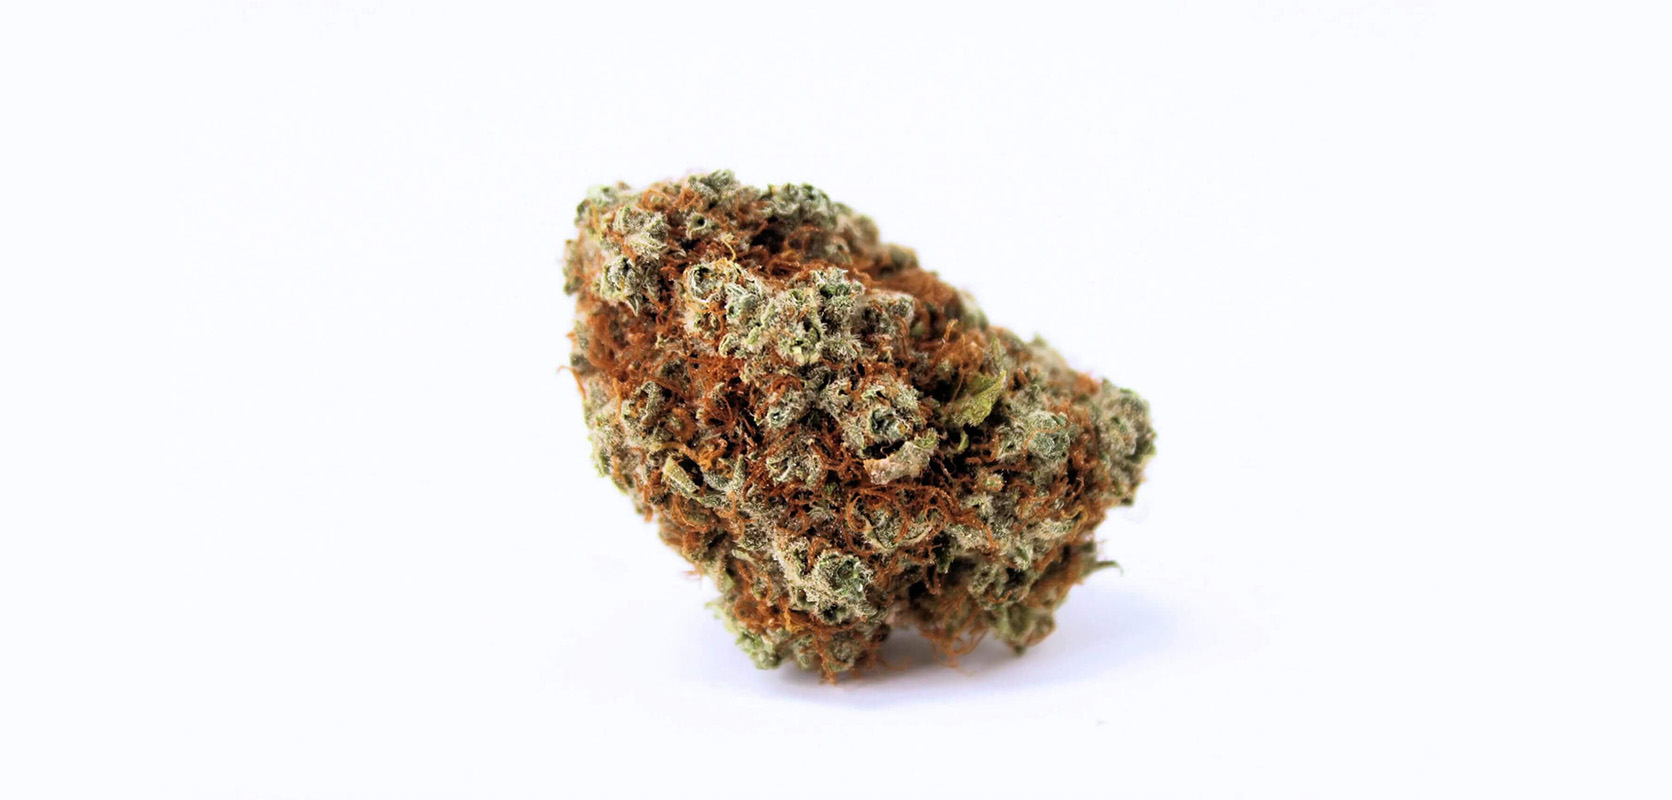 Blu Dream weed online Canada from Low Price Bud online dispensary for BC cannabis. how much does Blue Dream sell for in Canada? buy weed online. 